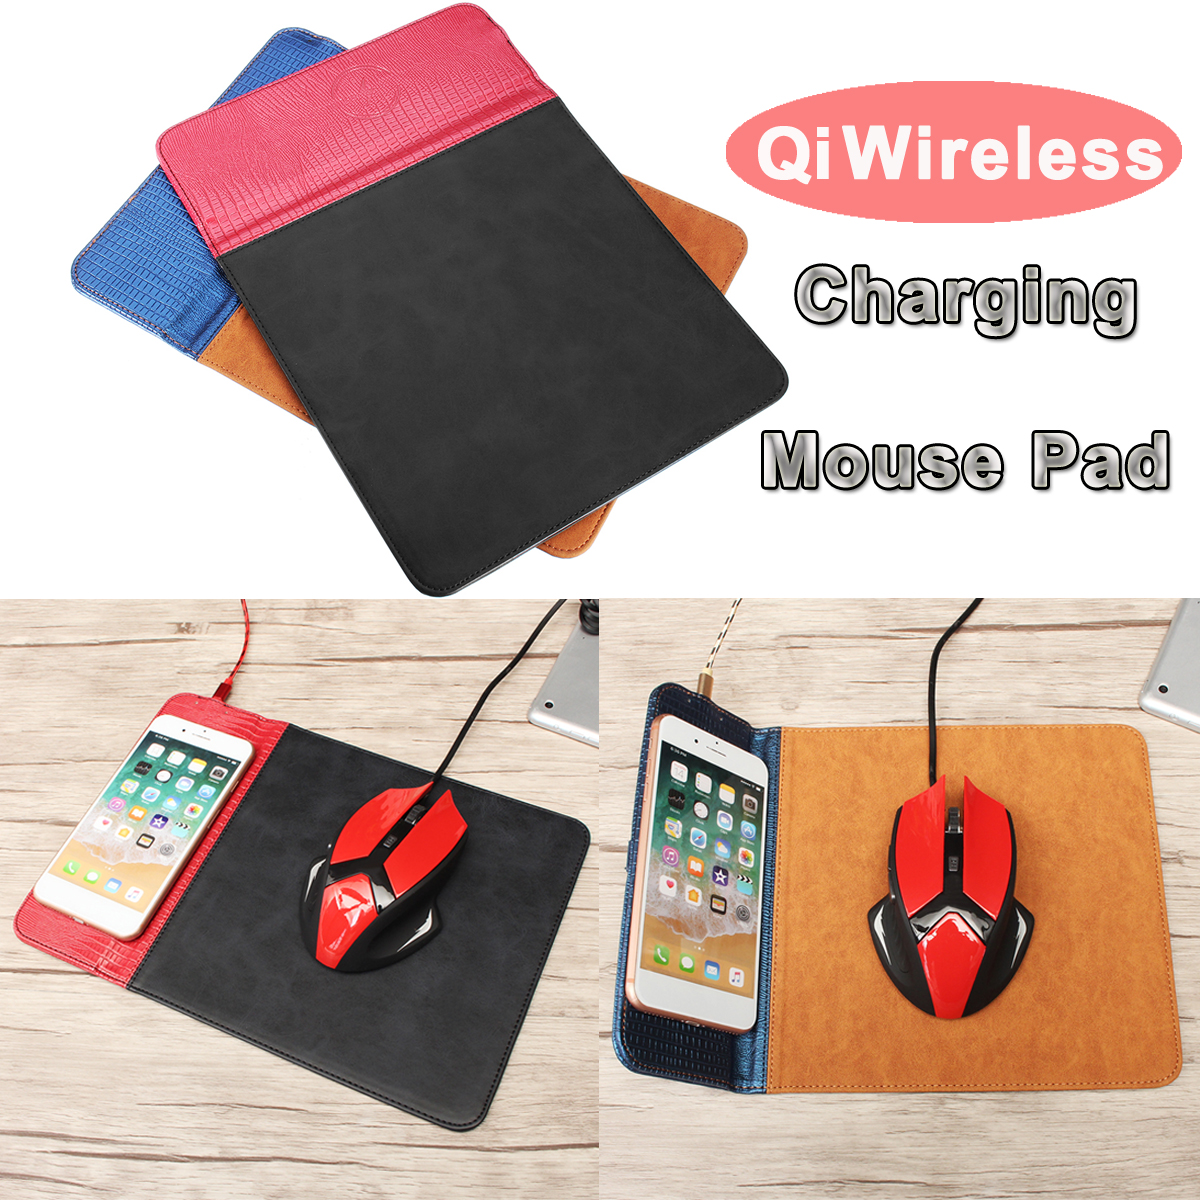 Qi-Wireless-Charging-Mouse-Pad-For-iPhone-X88-Plus-Samsung-Galaxy-S9S9-PlusNote-8S8S8-Plus-1280648-1